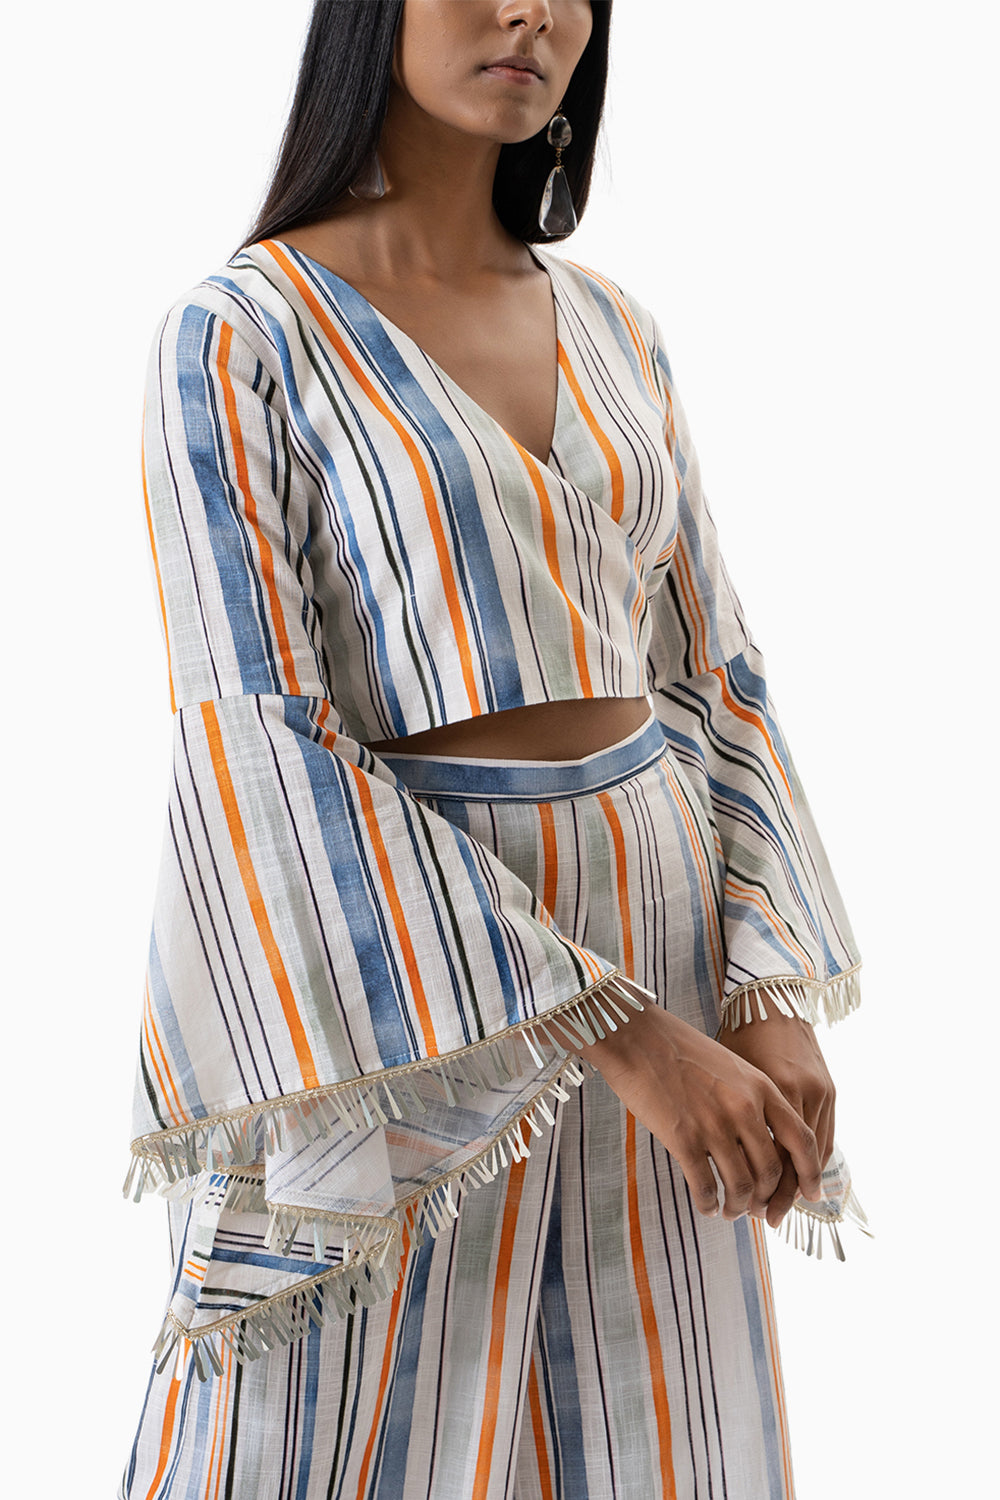 White and Blue Printed Stripes Co-ord Set